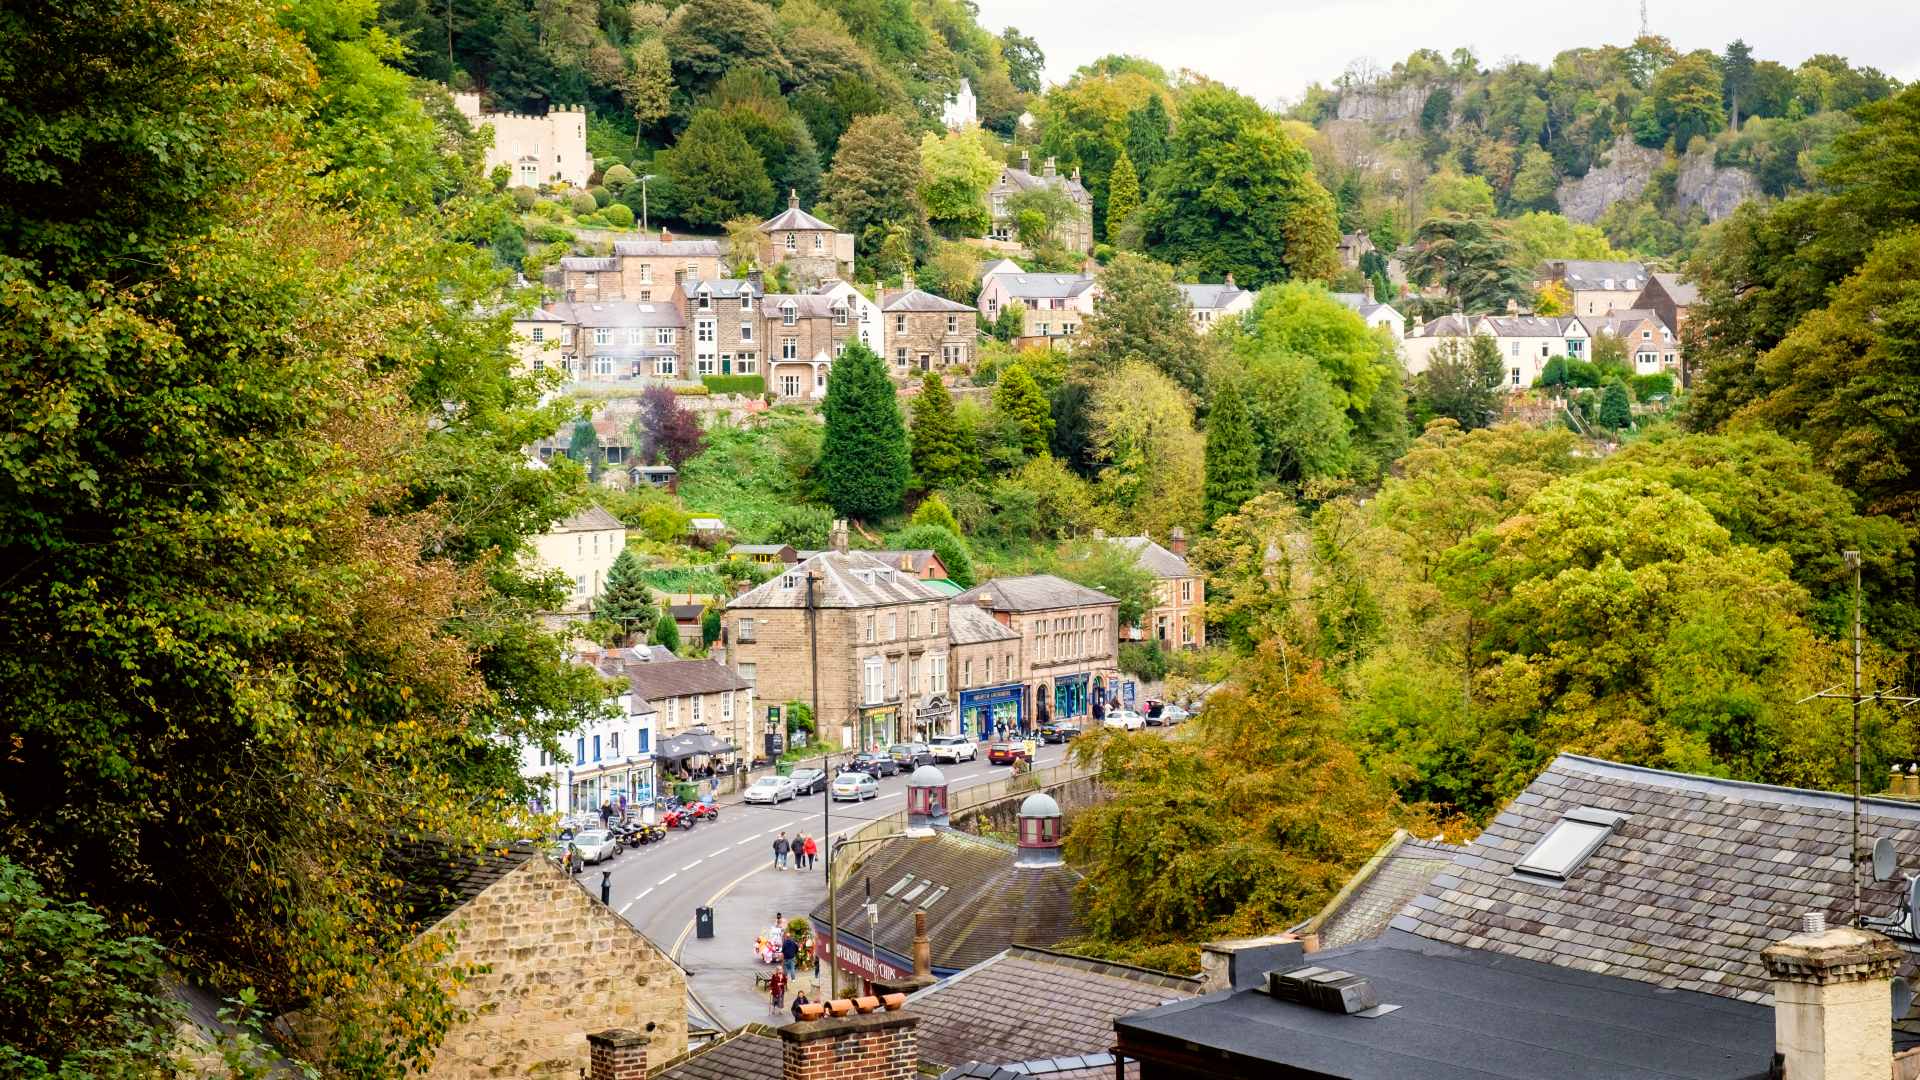 matlock bath surrounded by leafy green trees